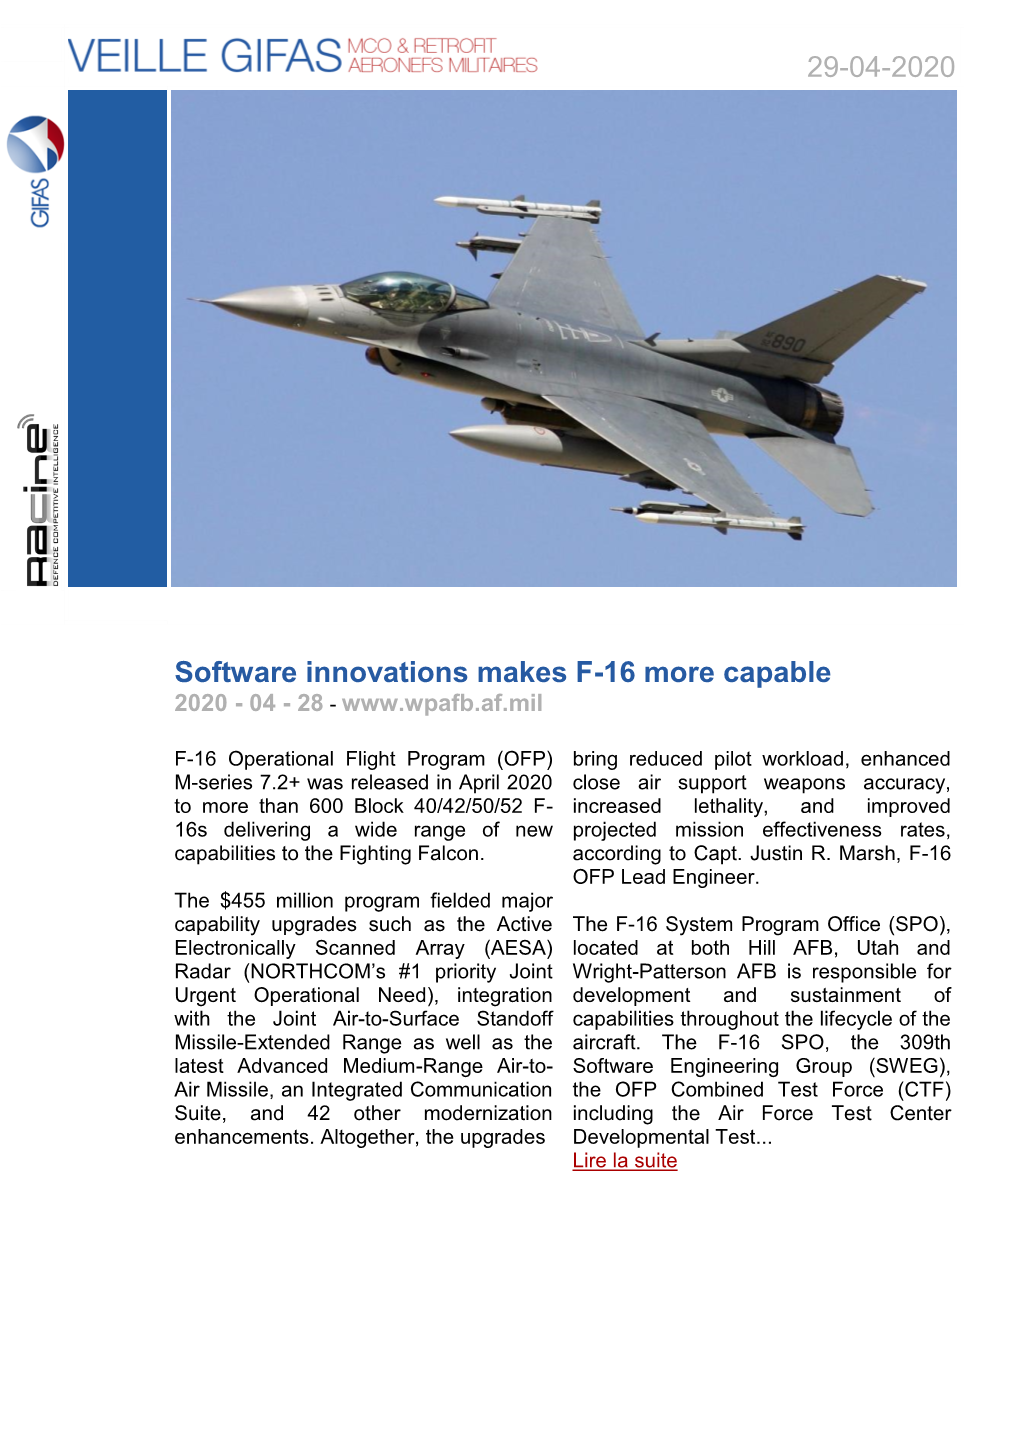 Software Innovations Makes F-16 More Capable 2020 - 04 - 28